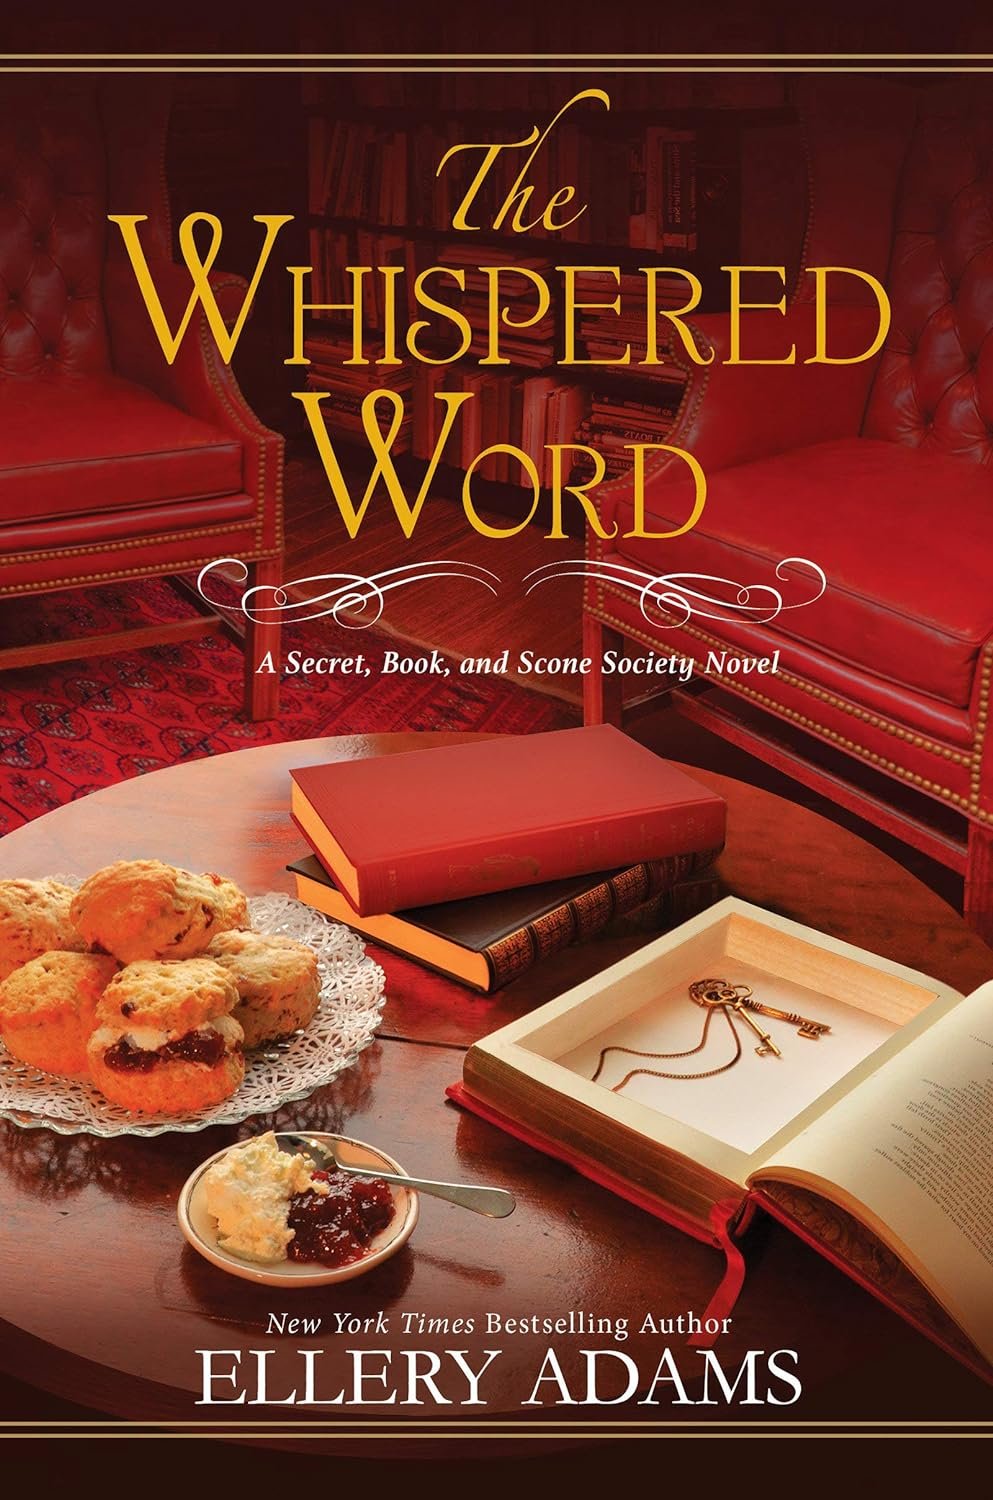 The Whispered Word (A Secret, Book and Scone Society Novel)